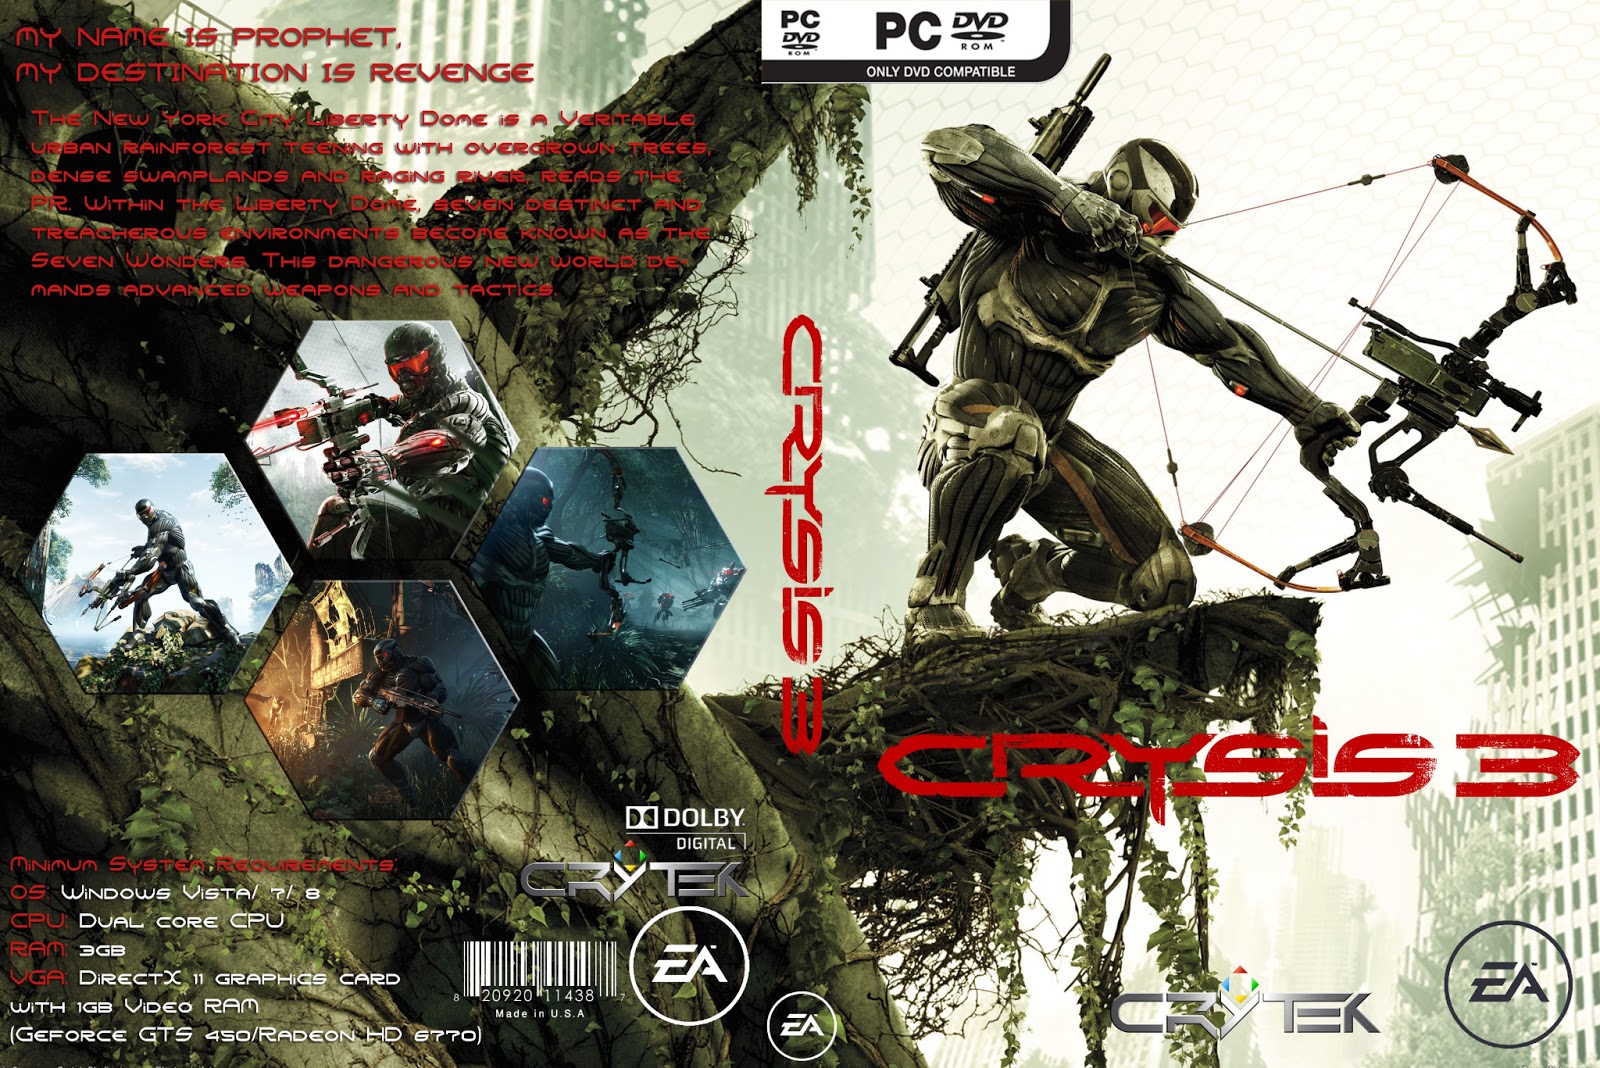 crysis 3 remastered steam download